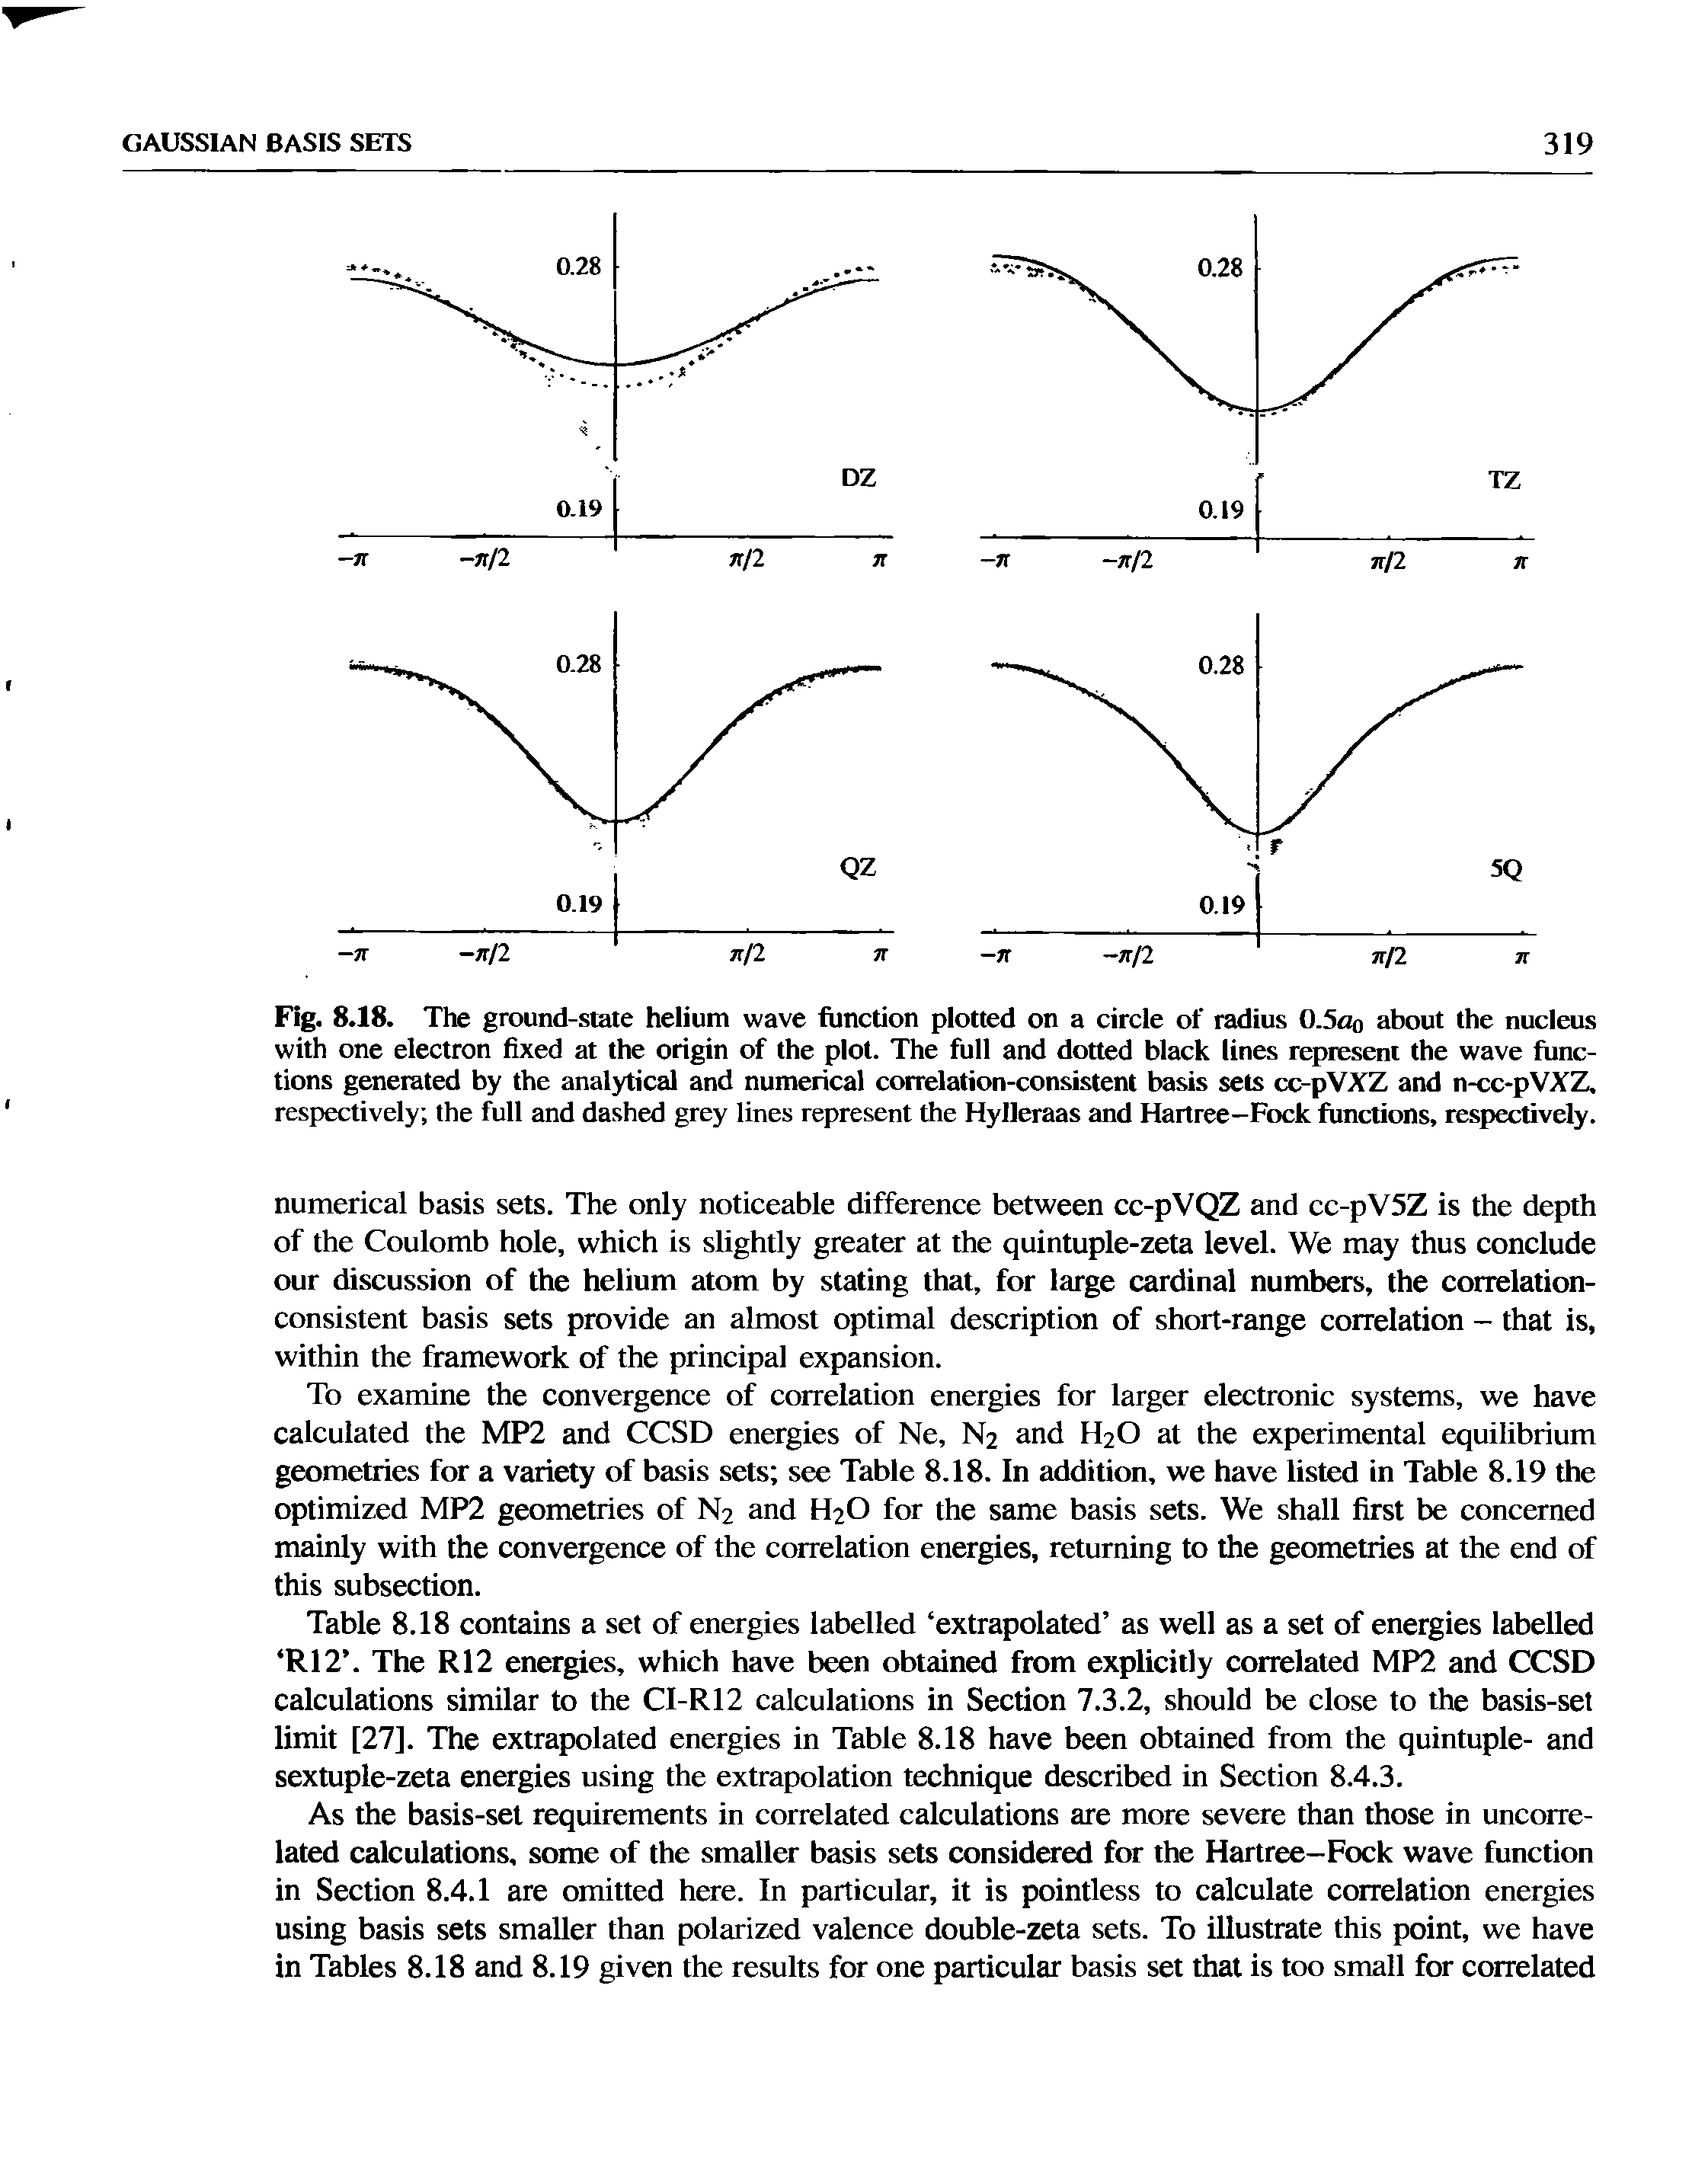 Fig. 8.18. The ground-state helium wave function plotted on a circle of ladius 0.5oo about the nucleus with one electron fixed at the origin of the plot. The full and dotted black lines repiesent the wave functions generated by the analytical and numerical correlation-consistent basis sets cc-pVXZ and n-cc-pVXZ,...